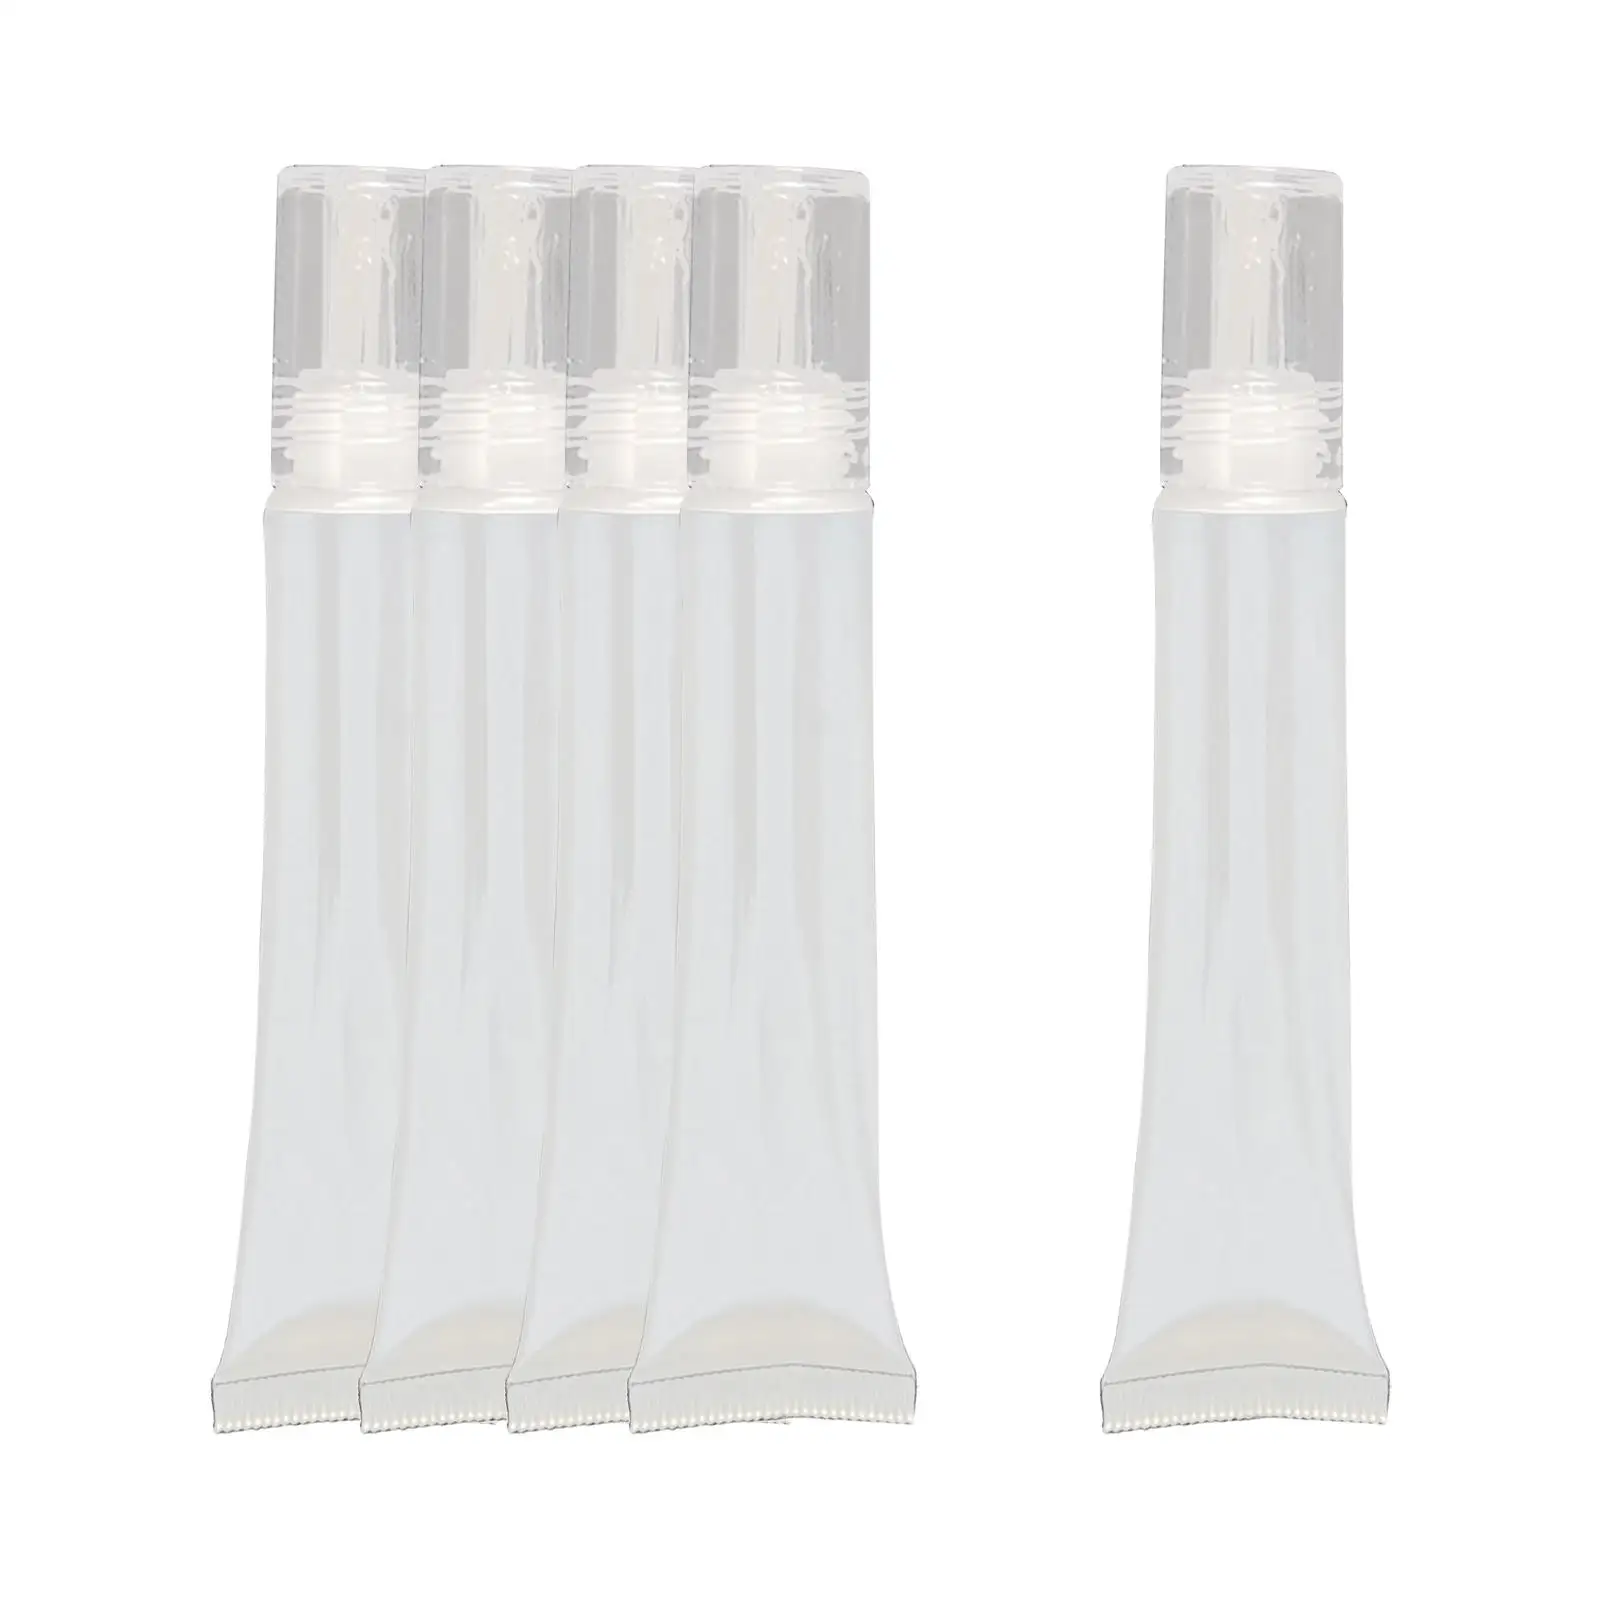 5x Cosmetic Soft Tubes Travel Packing Translucent Sample 20ml/0.7oz Reusable Container for Shampoo Lotion Lip Gloss Toothpaste